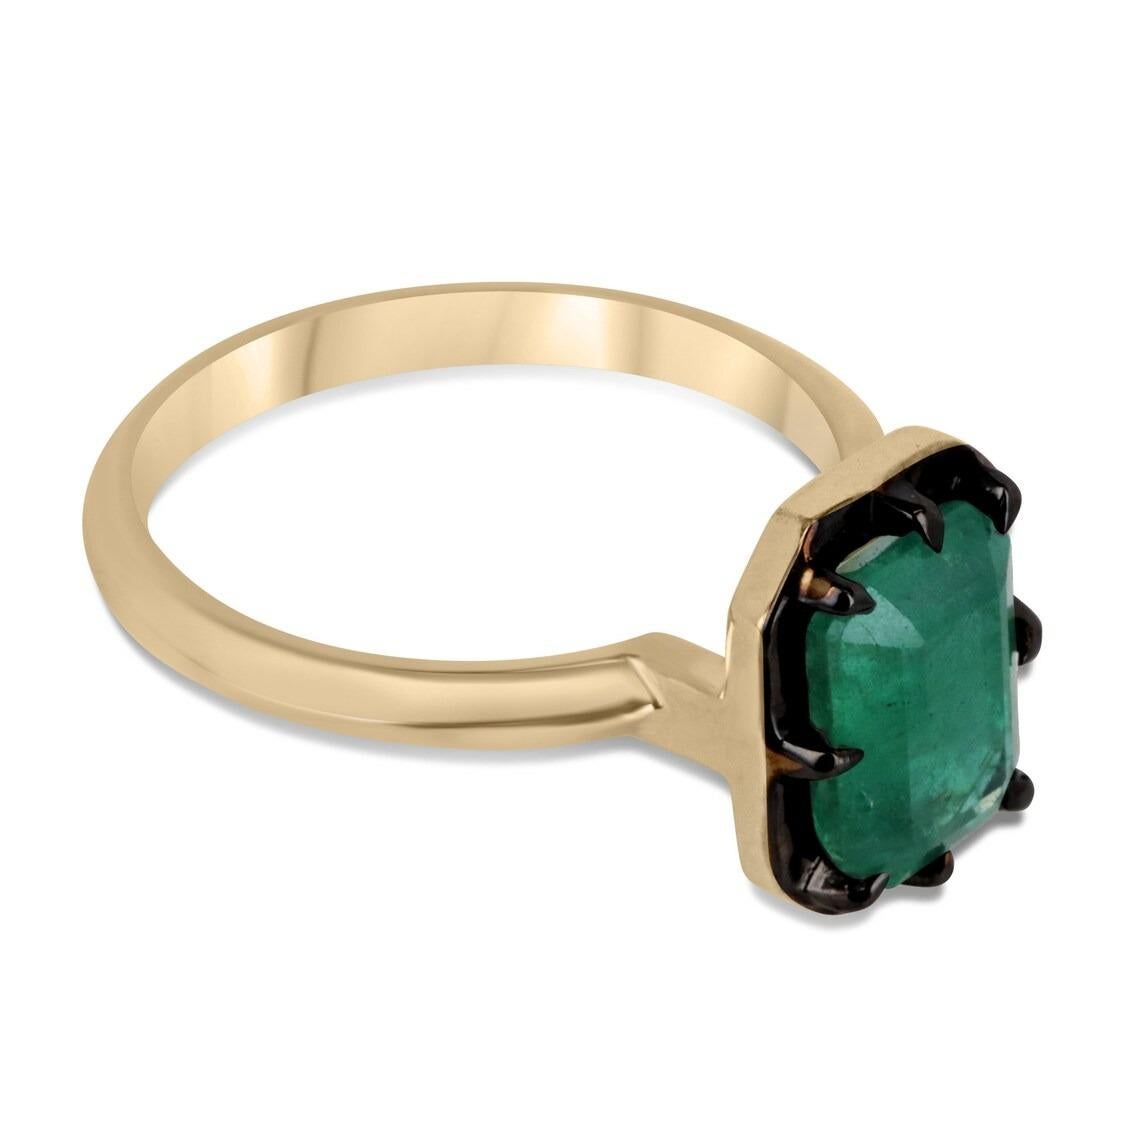 Displayed is an elegant, natural emerald solitaire emerald-cut engagement ring/right-hand ring in 14K yellow gold, with a black rhodium rim. This gorgeous solitaire ring carries a full 2.32-carat Zambian emerald in an eight-prong Georgian/collet